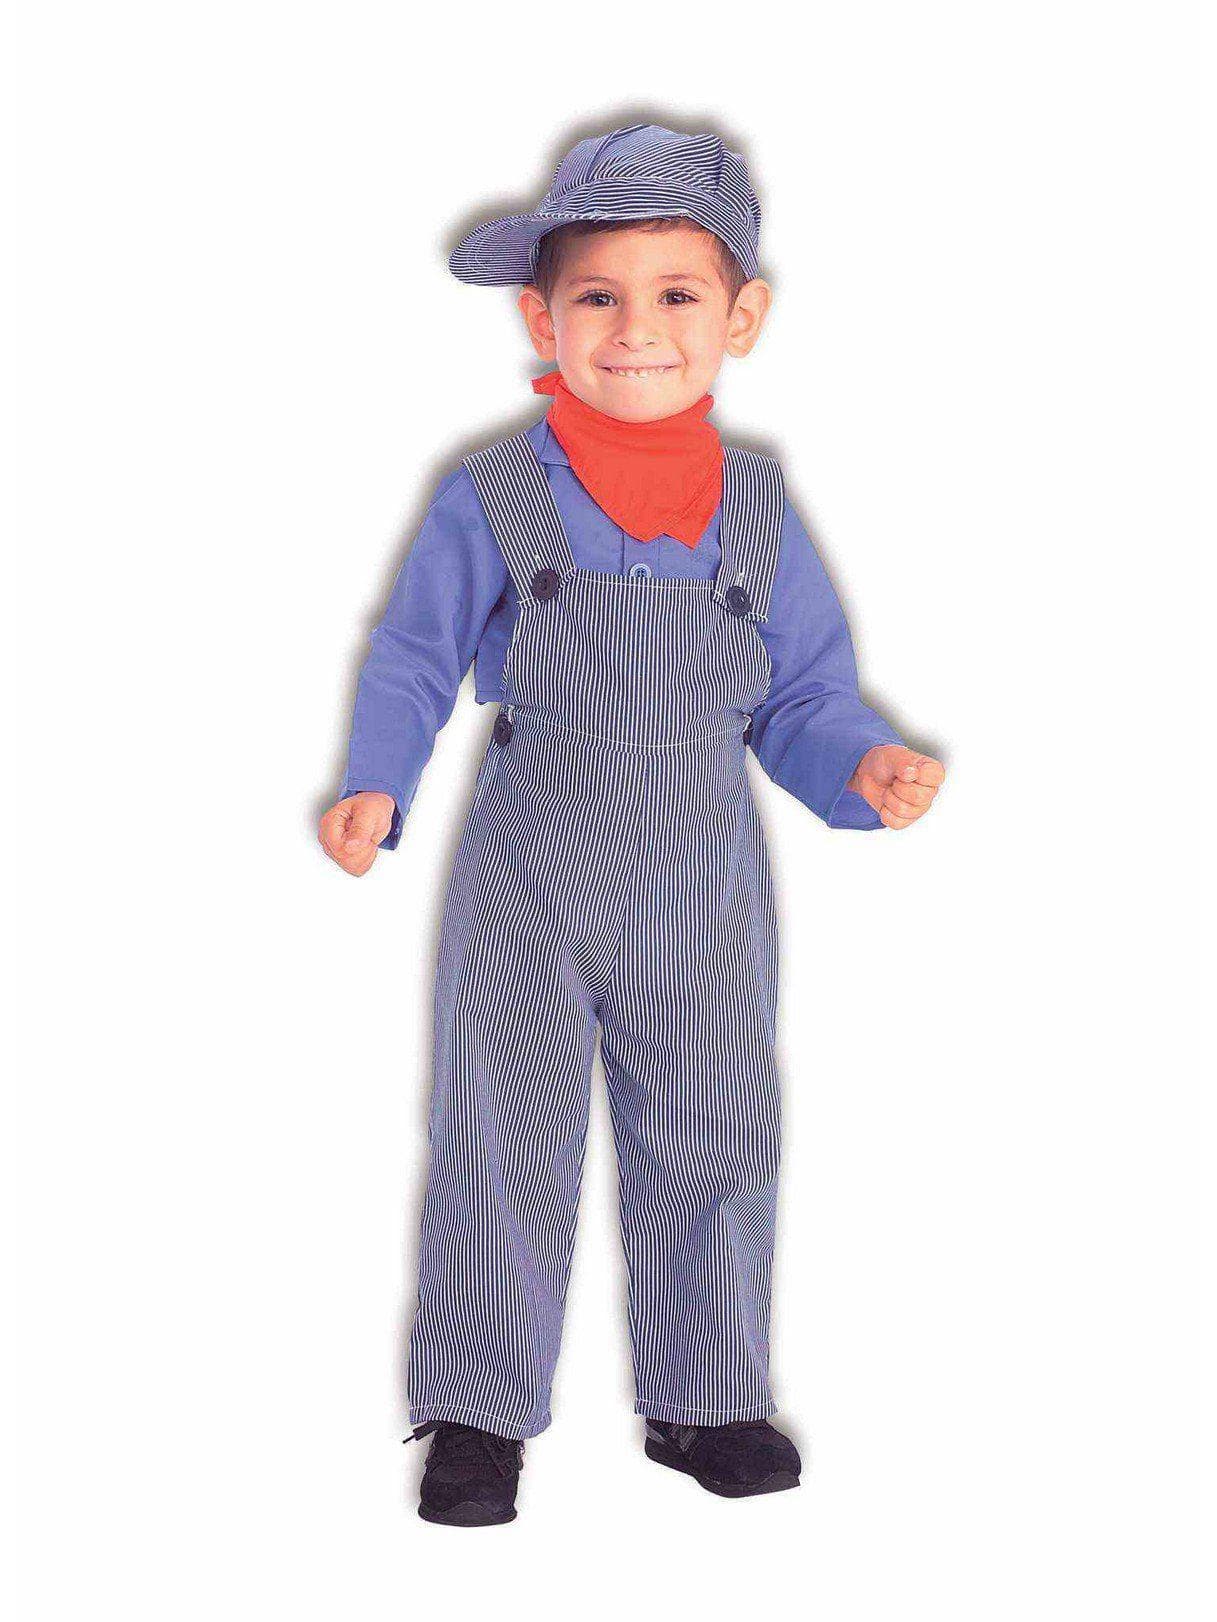 Baby/Toddler Lil' Engineer Costume - costumes.com